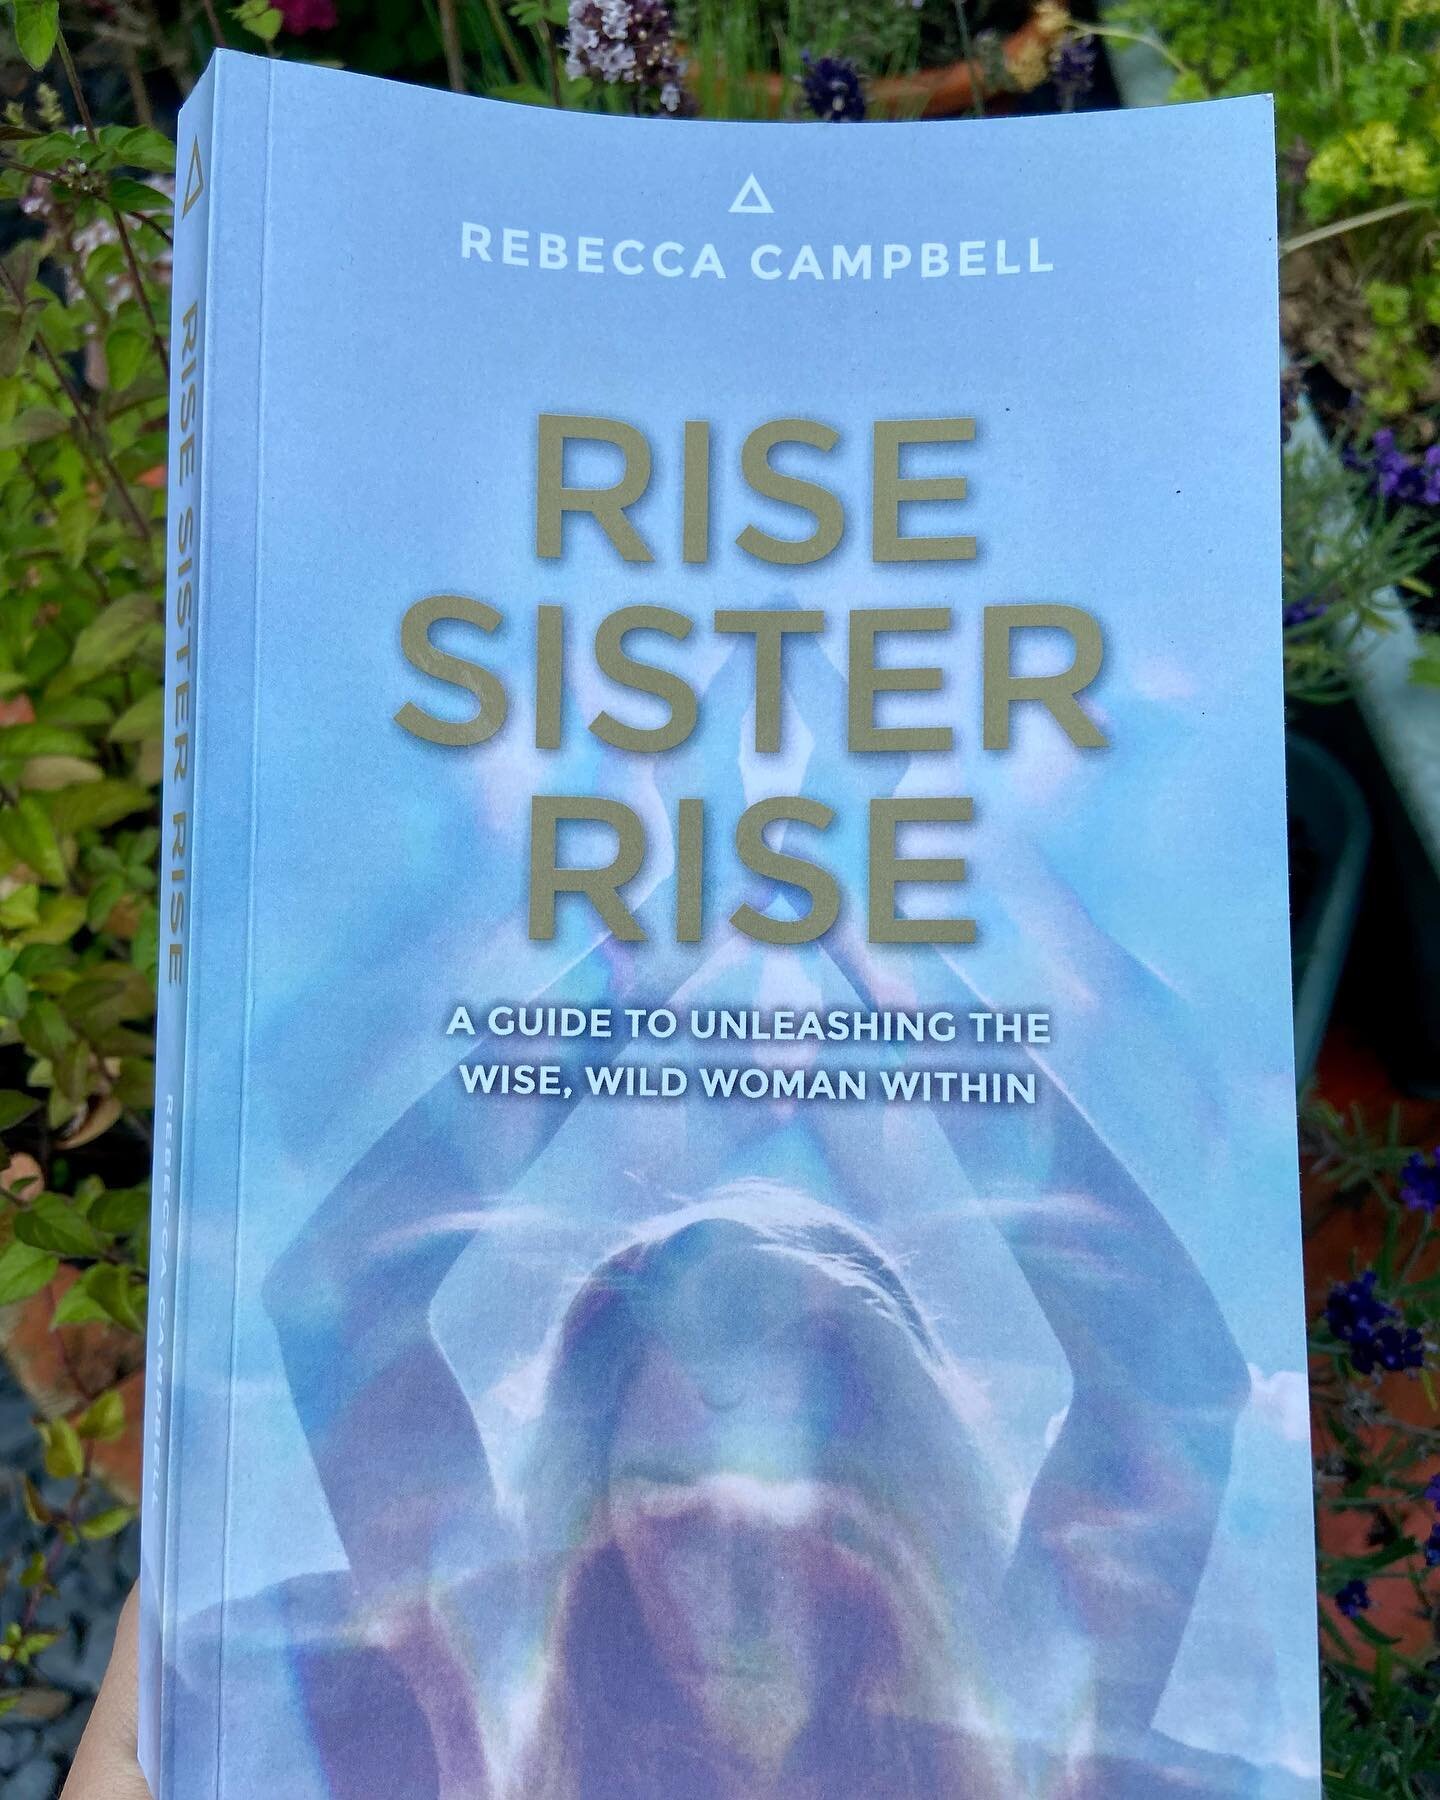 Loving this book by @rebeccacampbell_author&hellip;. Highly recommend ✨
.
.
#risesisterrise #spiritualgrowth #spritualjourney #spiritualbooks #witchesofinstagram